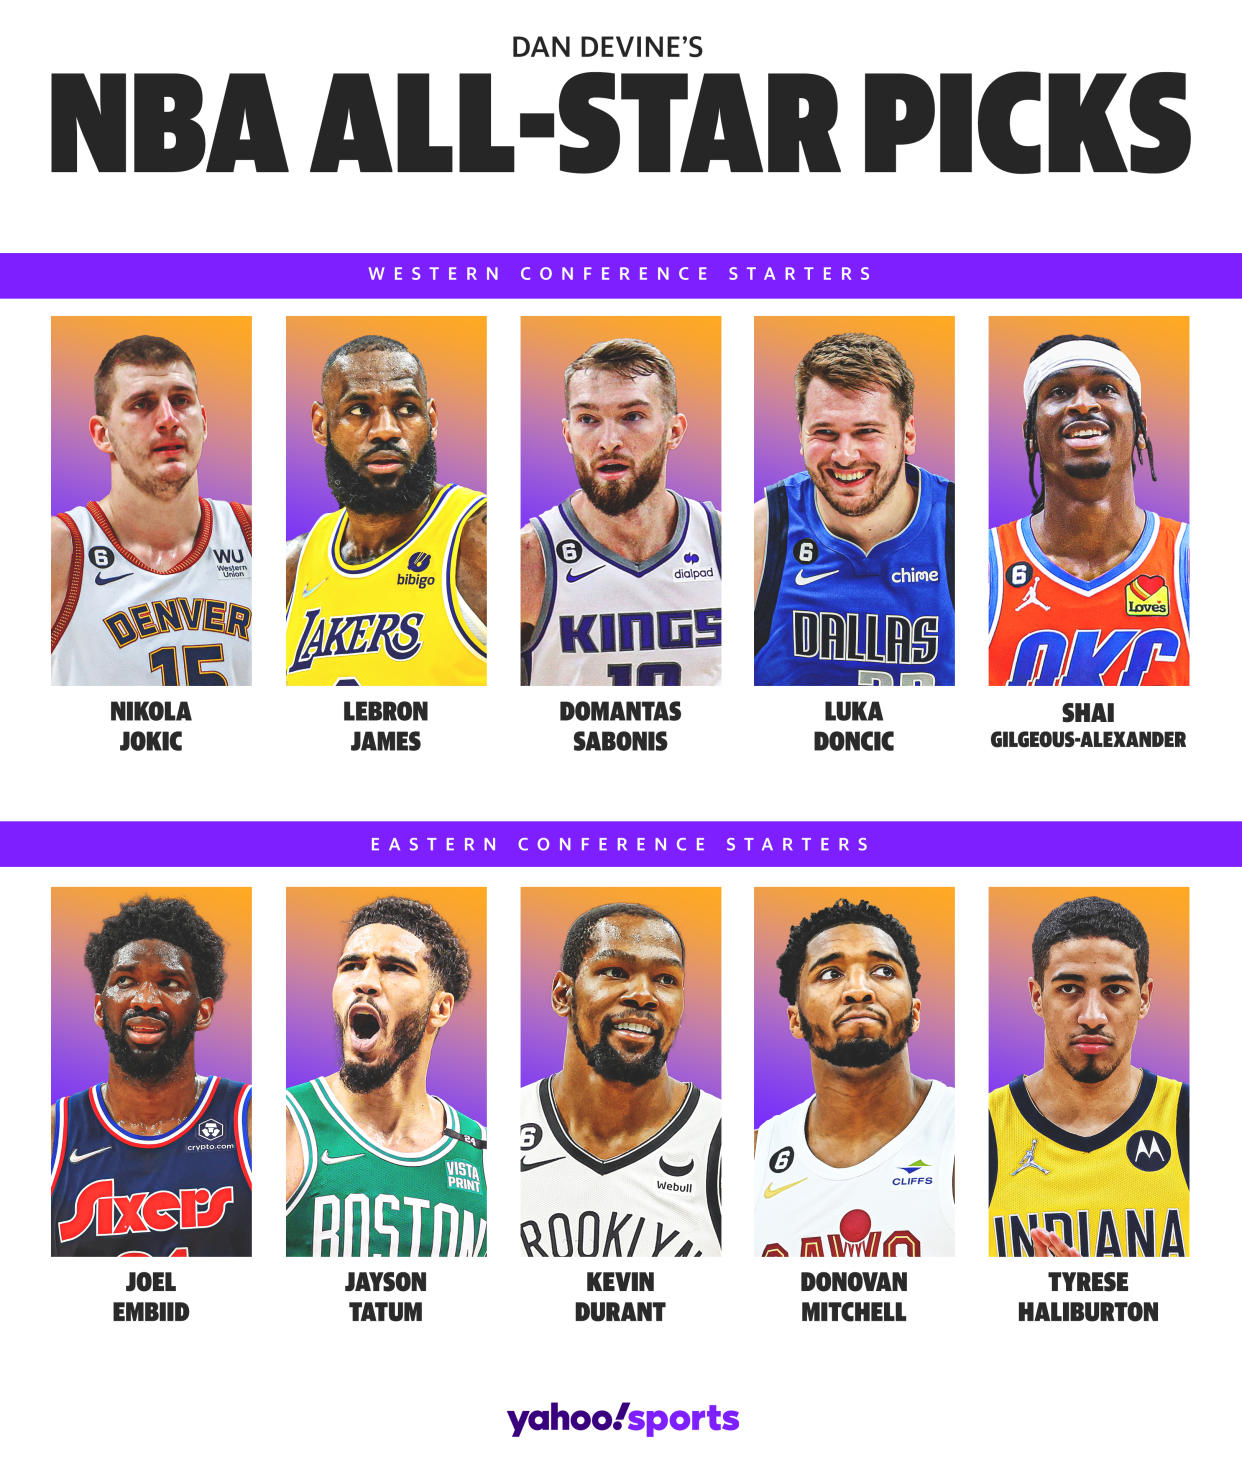 Dan Devine's 2023 NBA All-Star starters selections. (Graphic by Amber Matsumoto/Yahoo Sports)